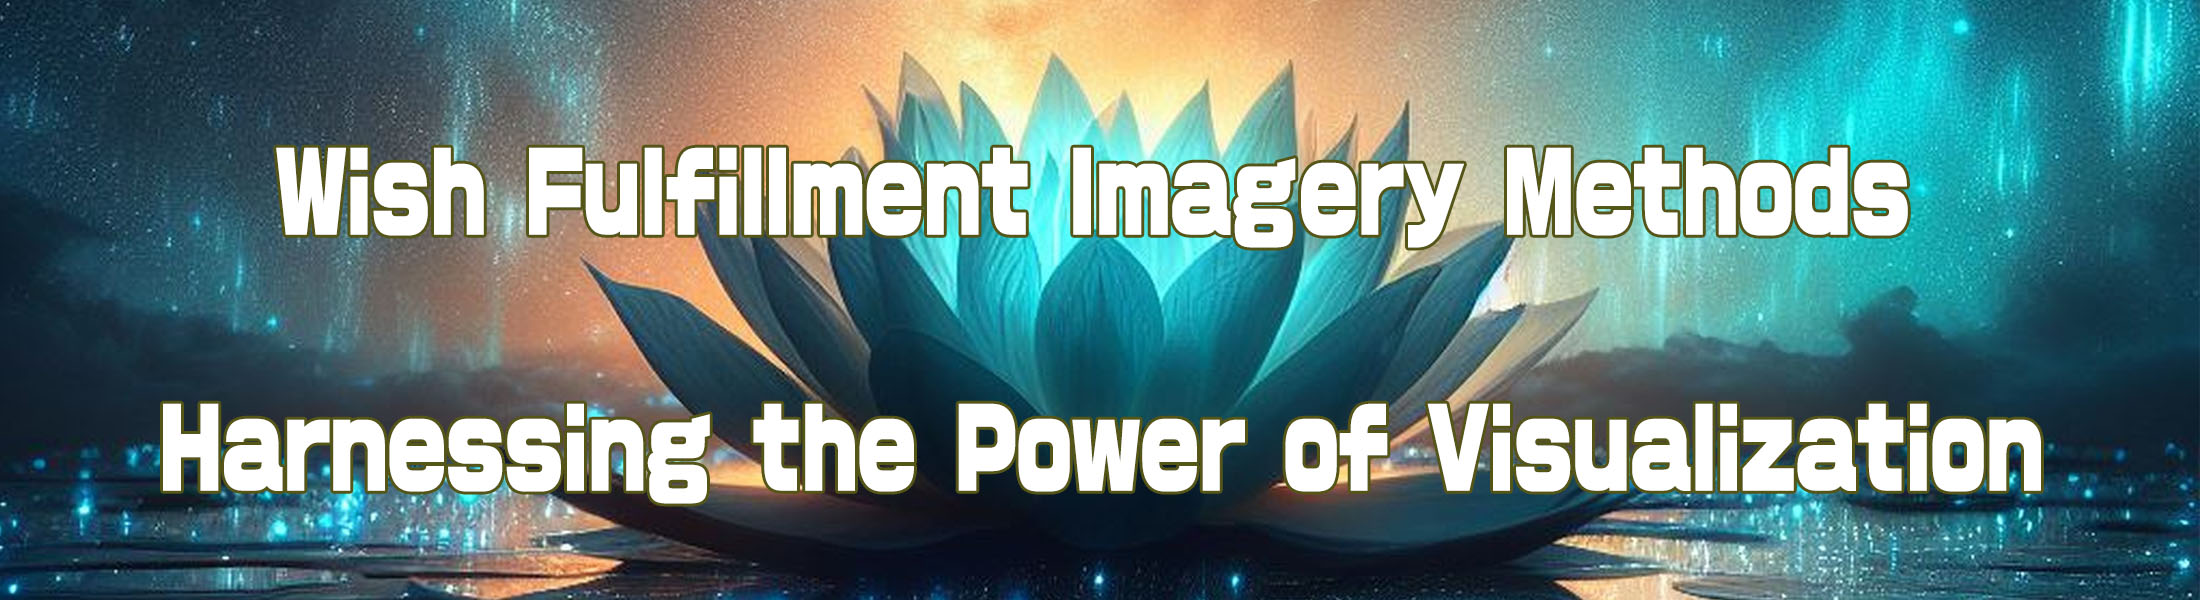 The Power of Potential: Embracing Multiple Self-Images